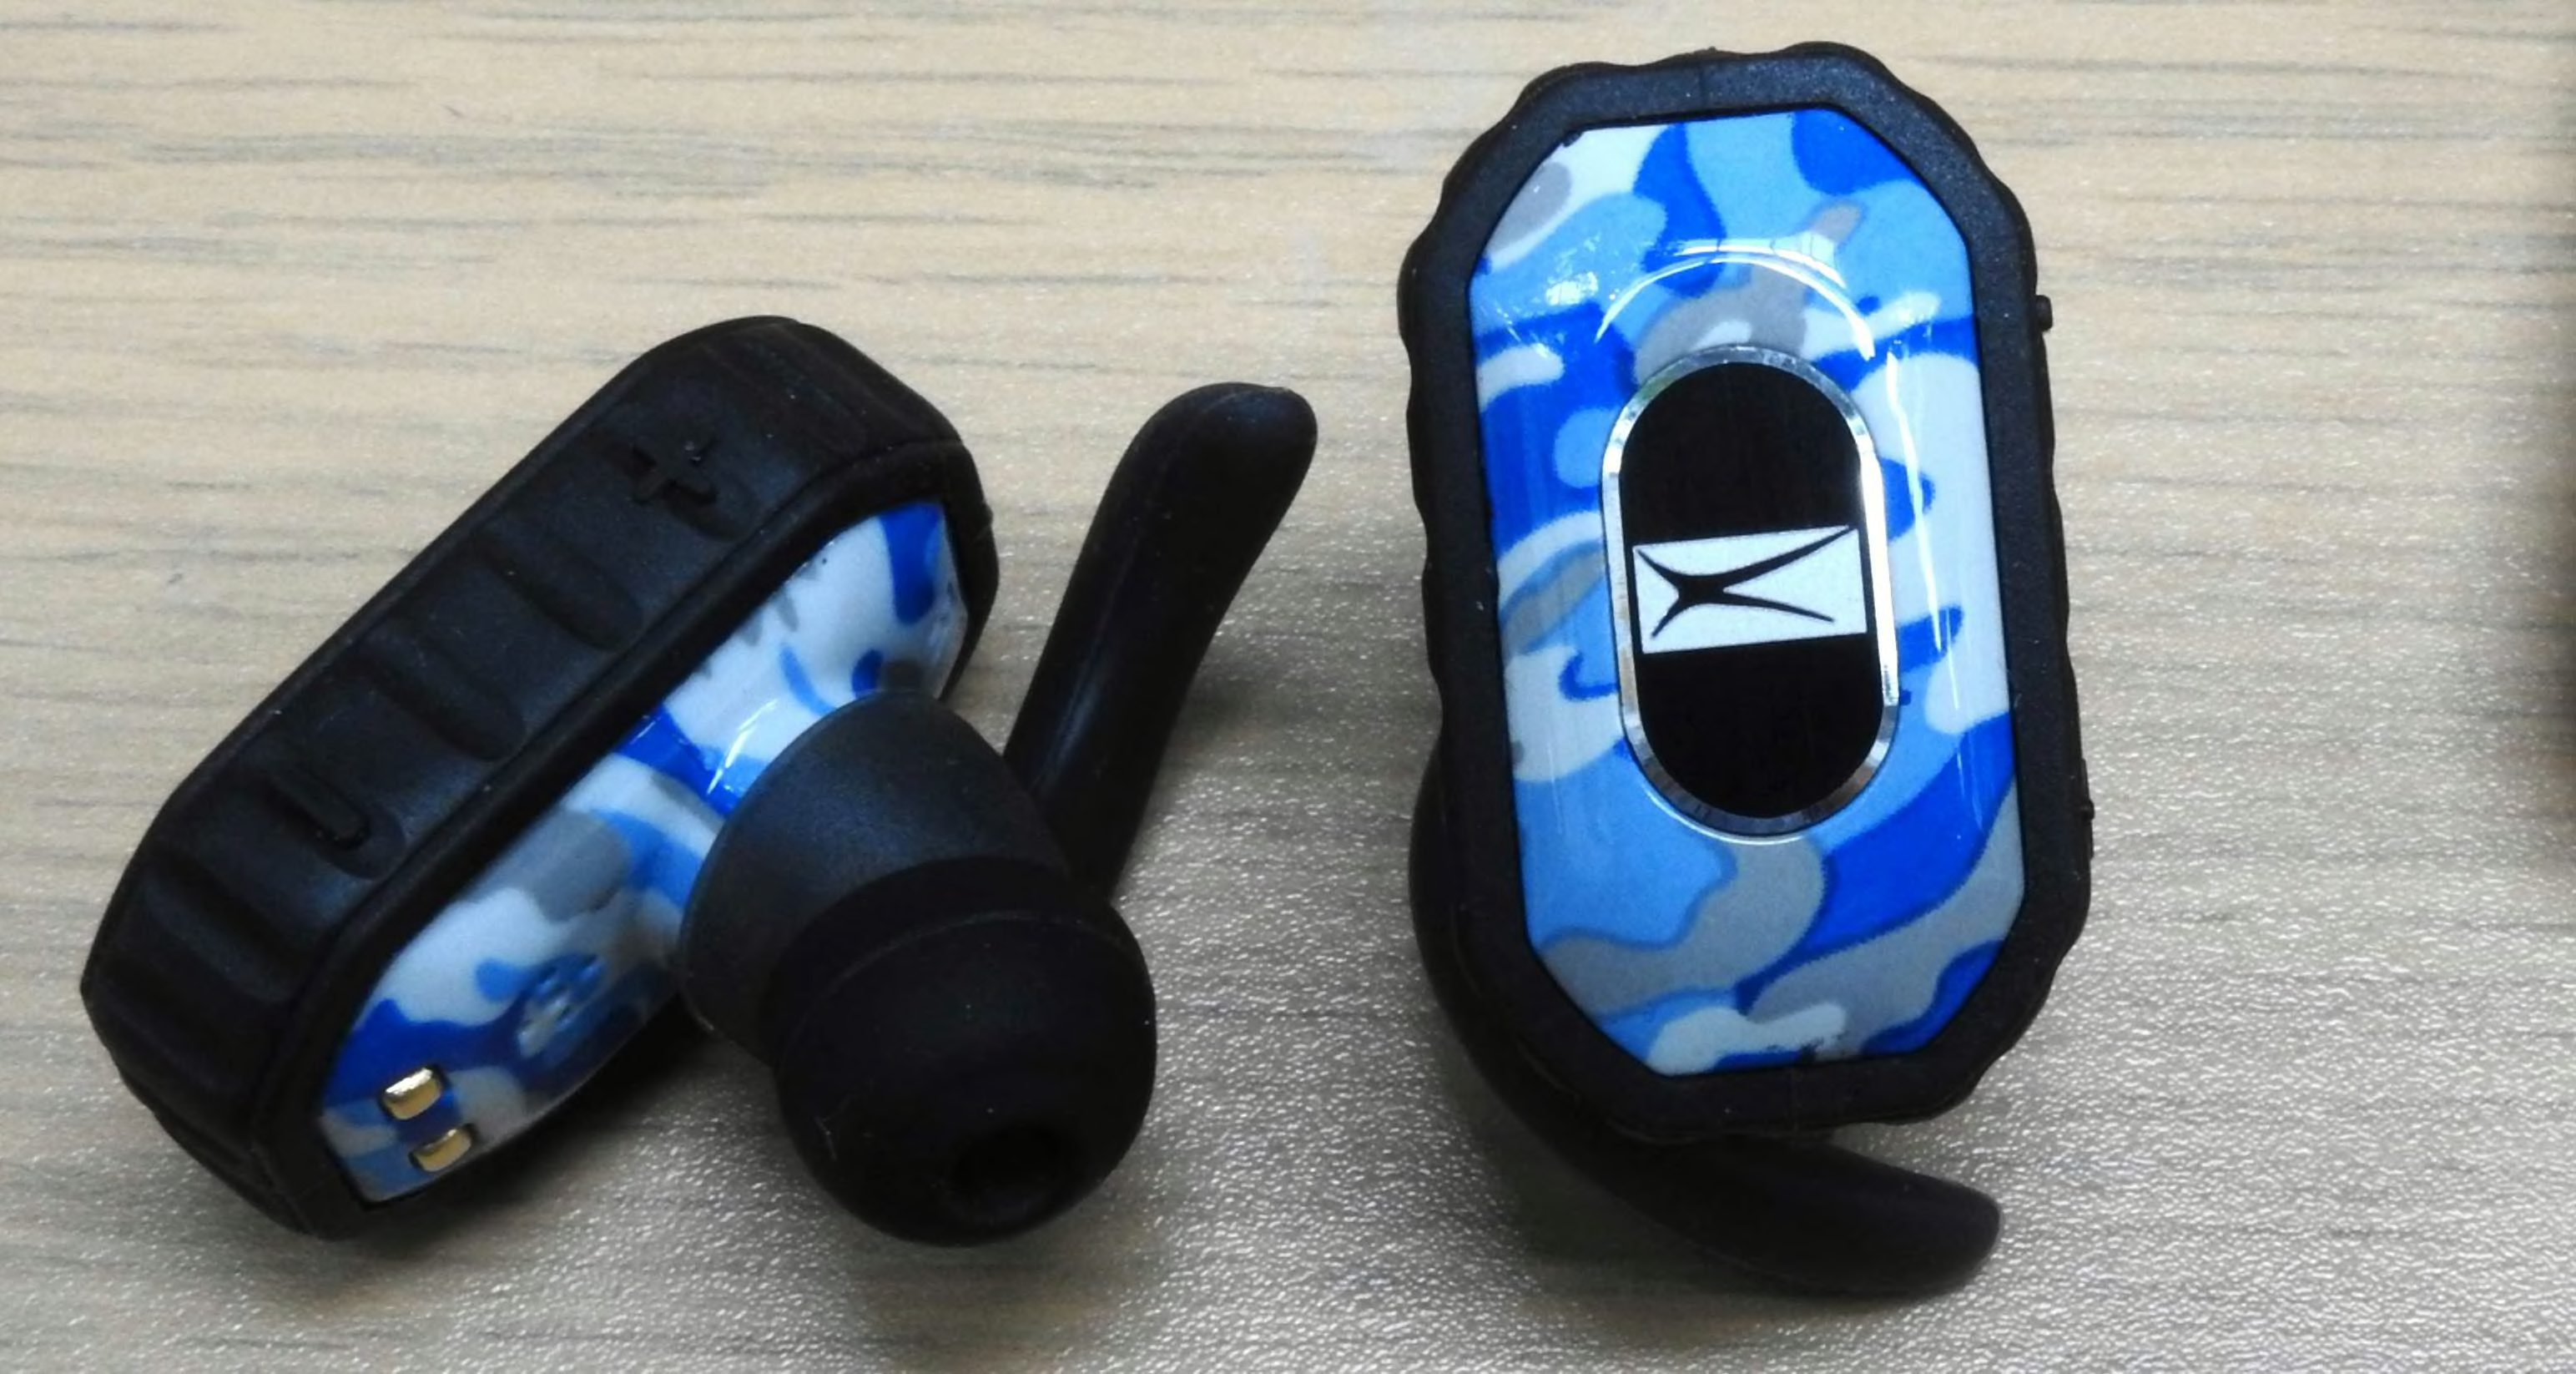 Altec Lansing's truly wireless earbuds.